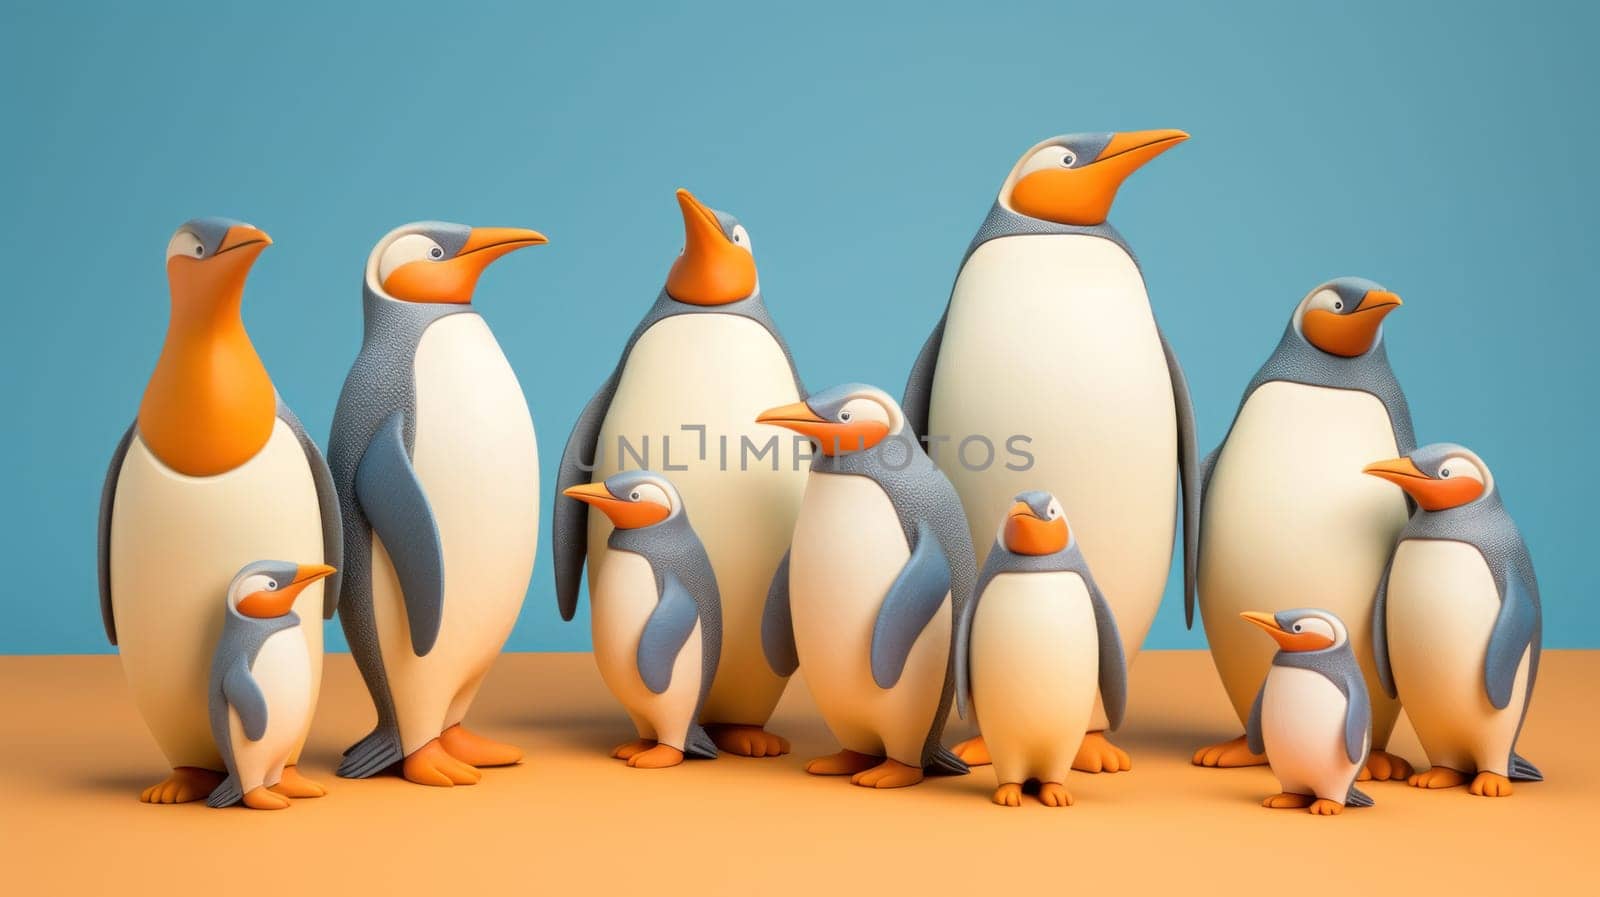 A group of penguins standing next to each other